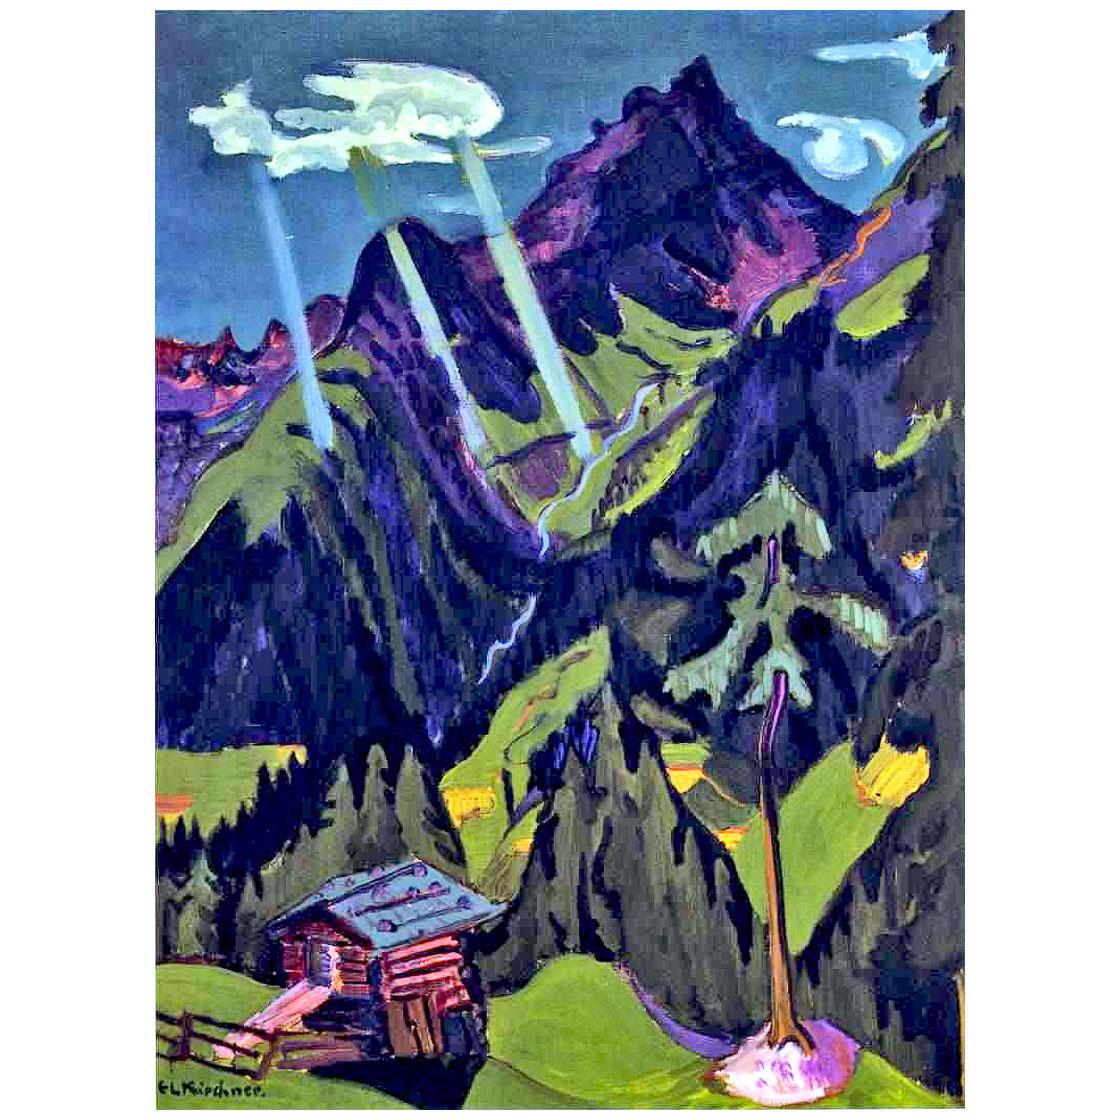 Ernst Ludwig Kirchner. Landscape in Graubünden with sun rays. 1930. Private collection